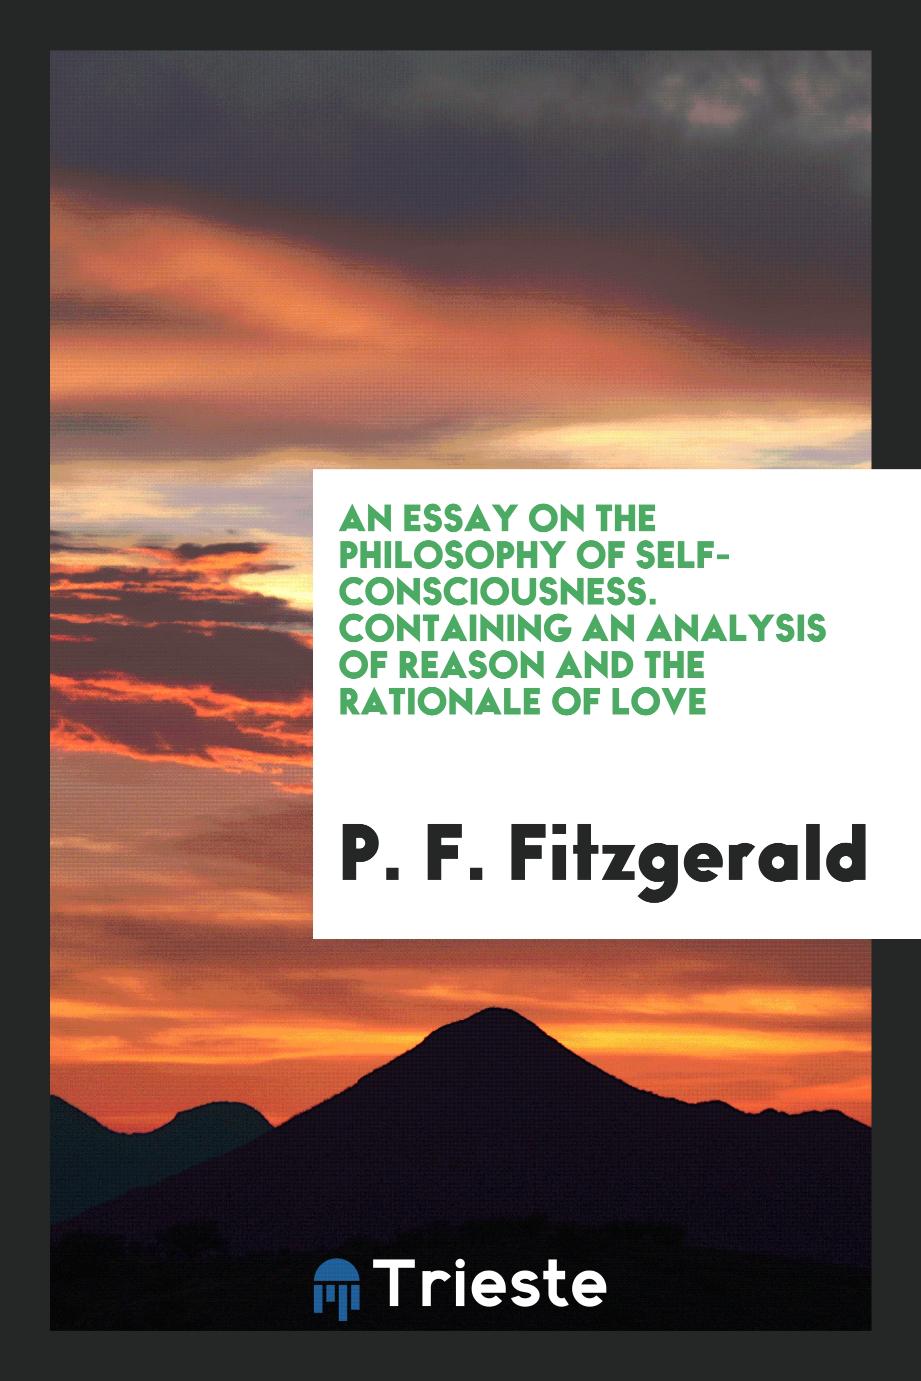 An Essay on the Philosophy of Self-Consciousness. Containing an Analysis of Reason and the Rationale of Love